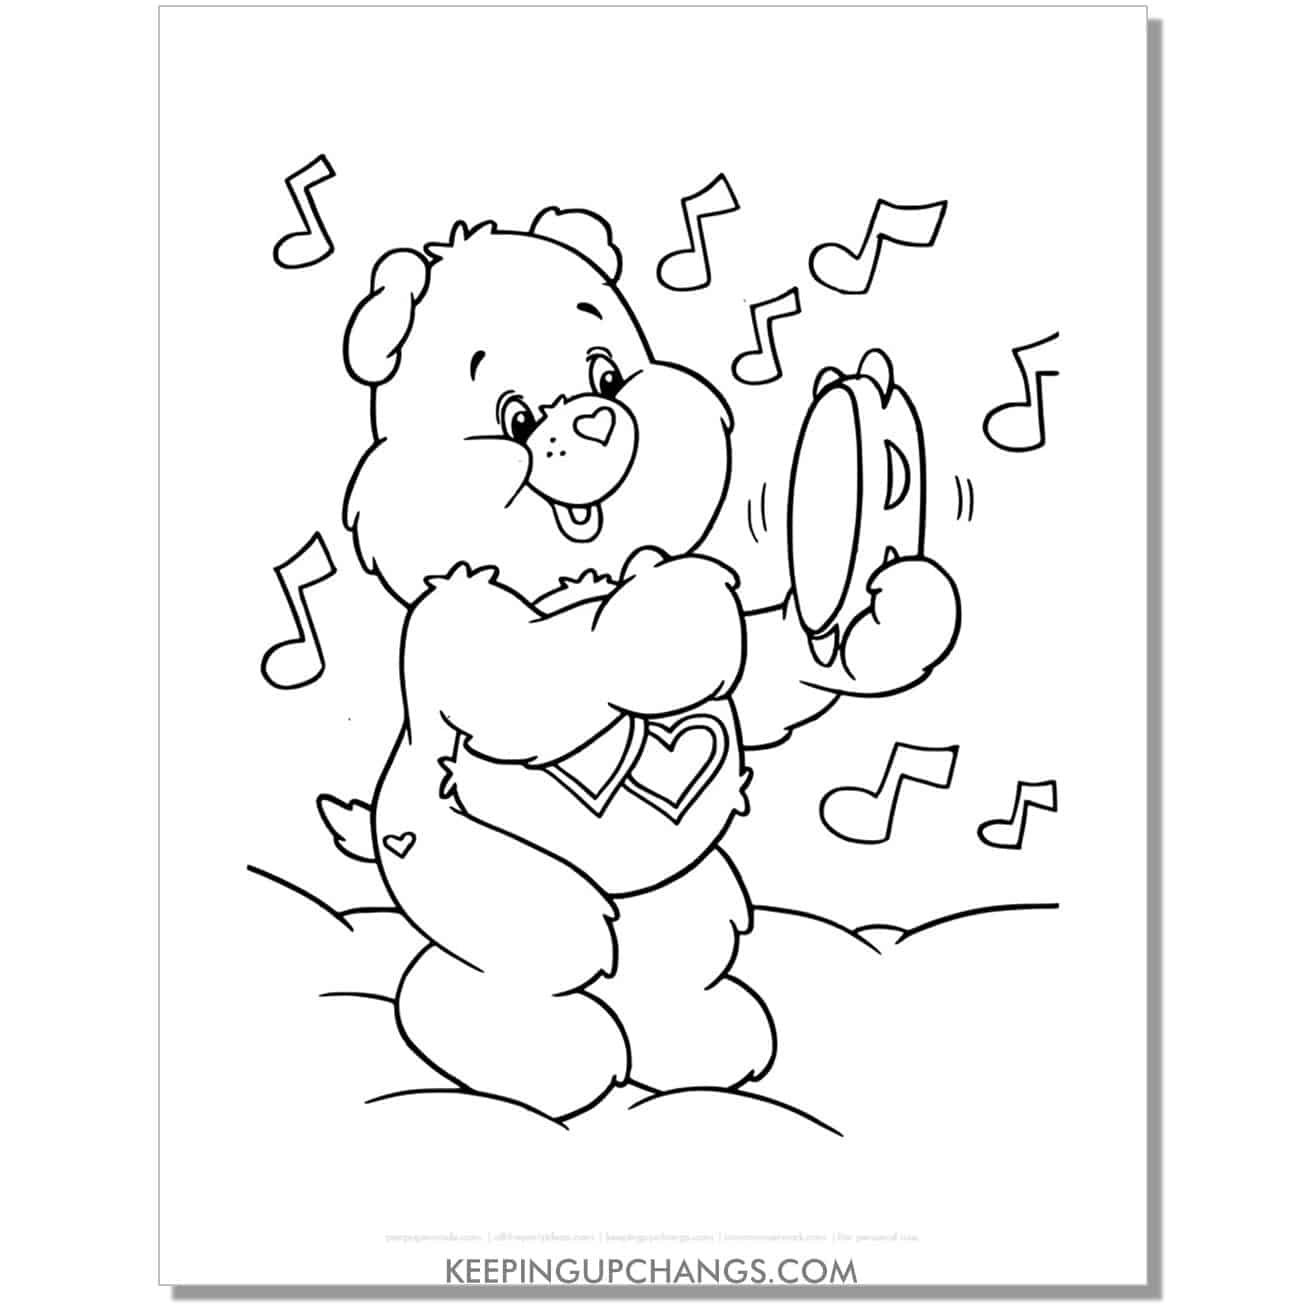 always there bear playing music care bear coloring page, sheet.